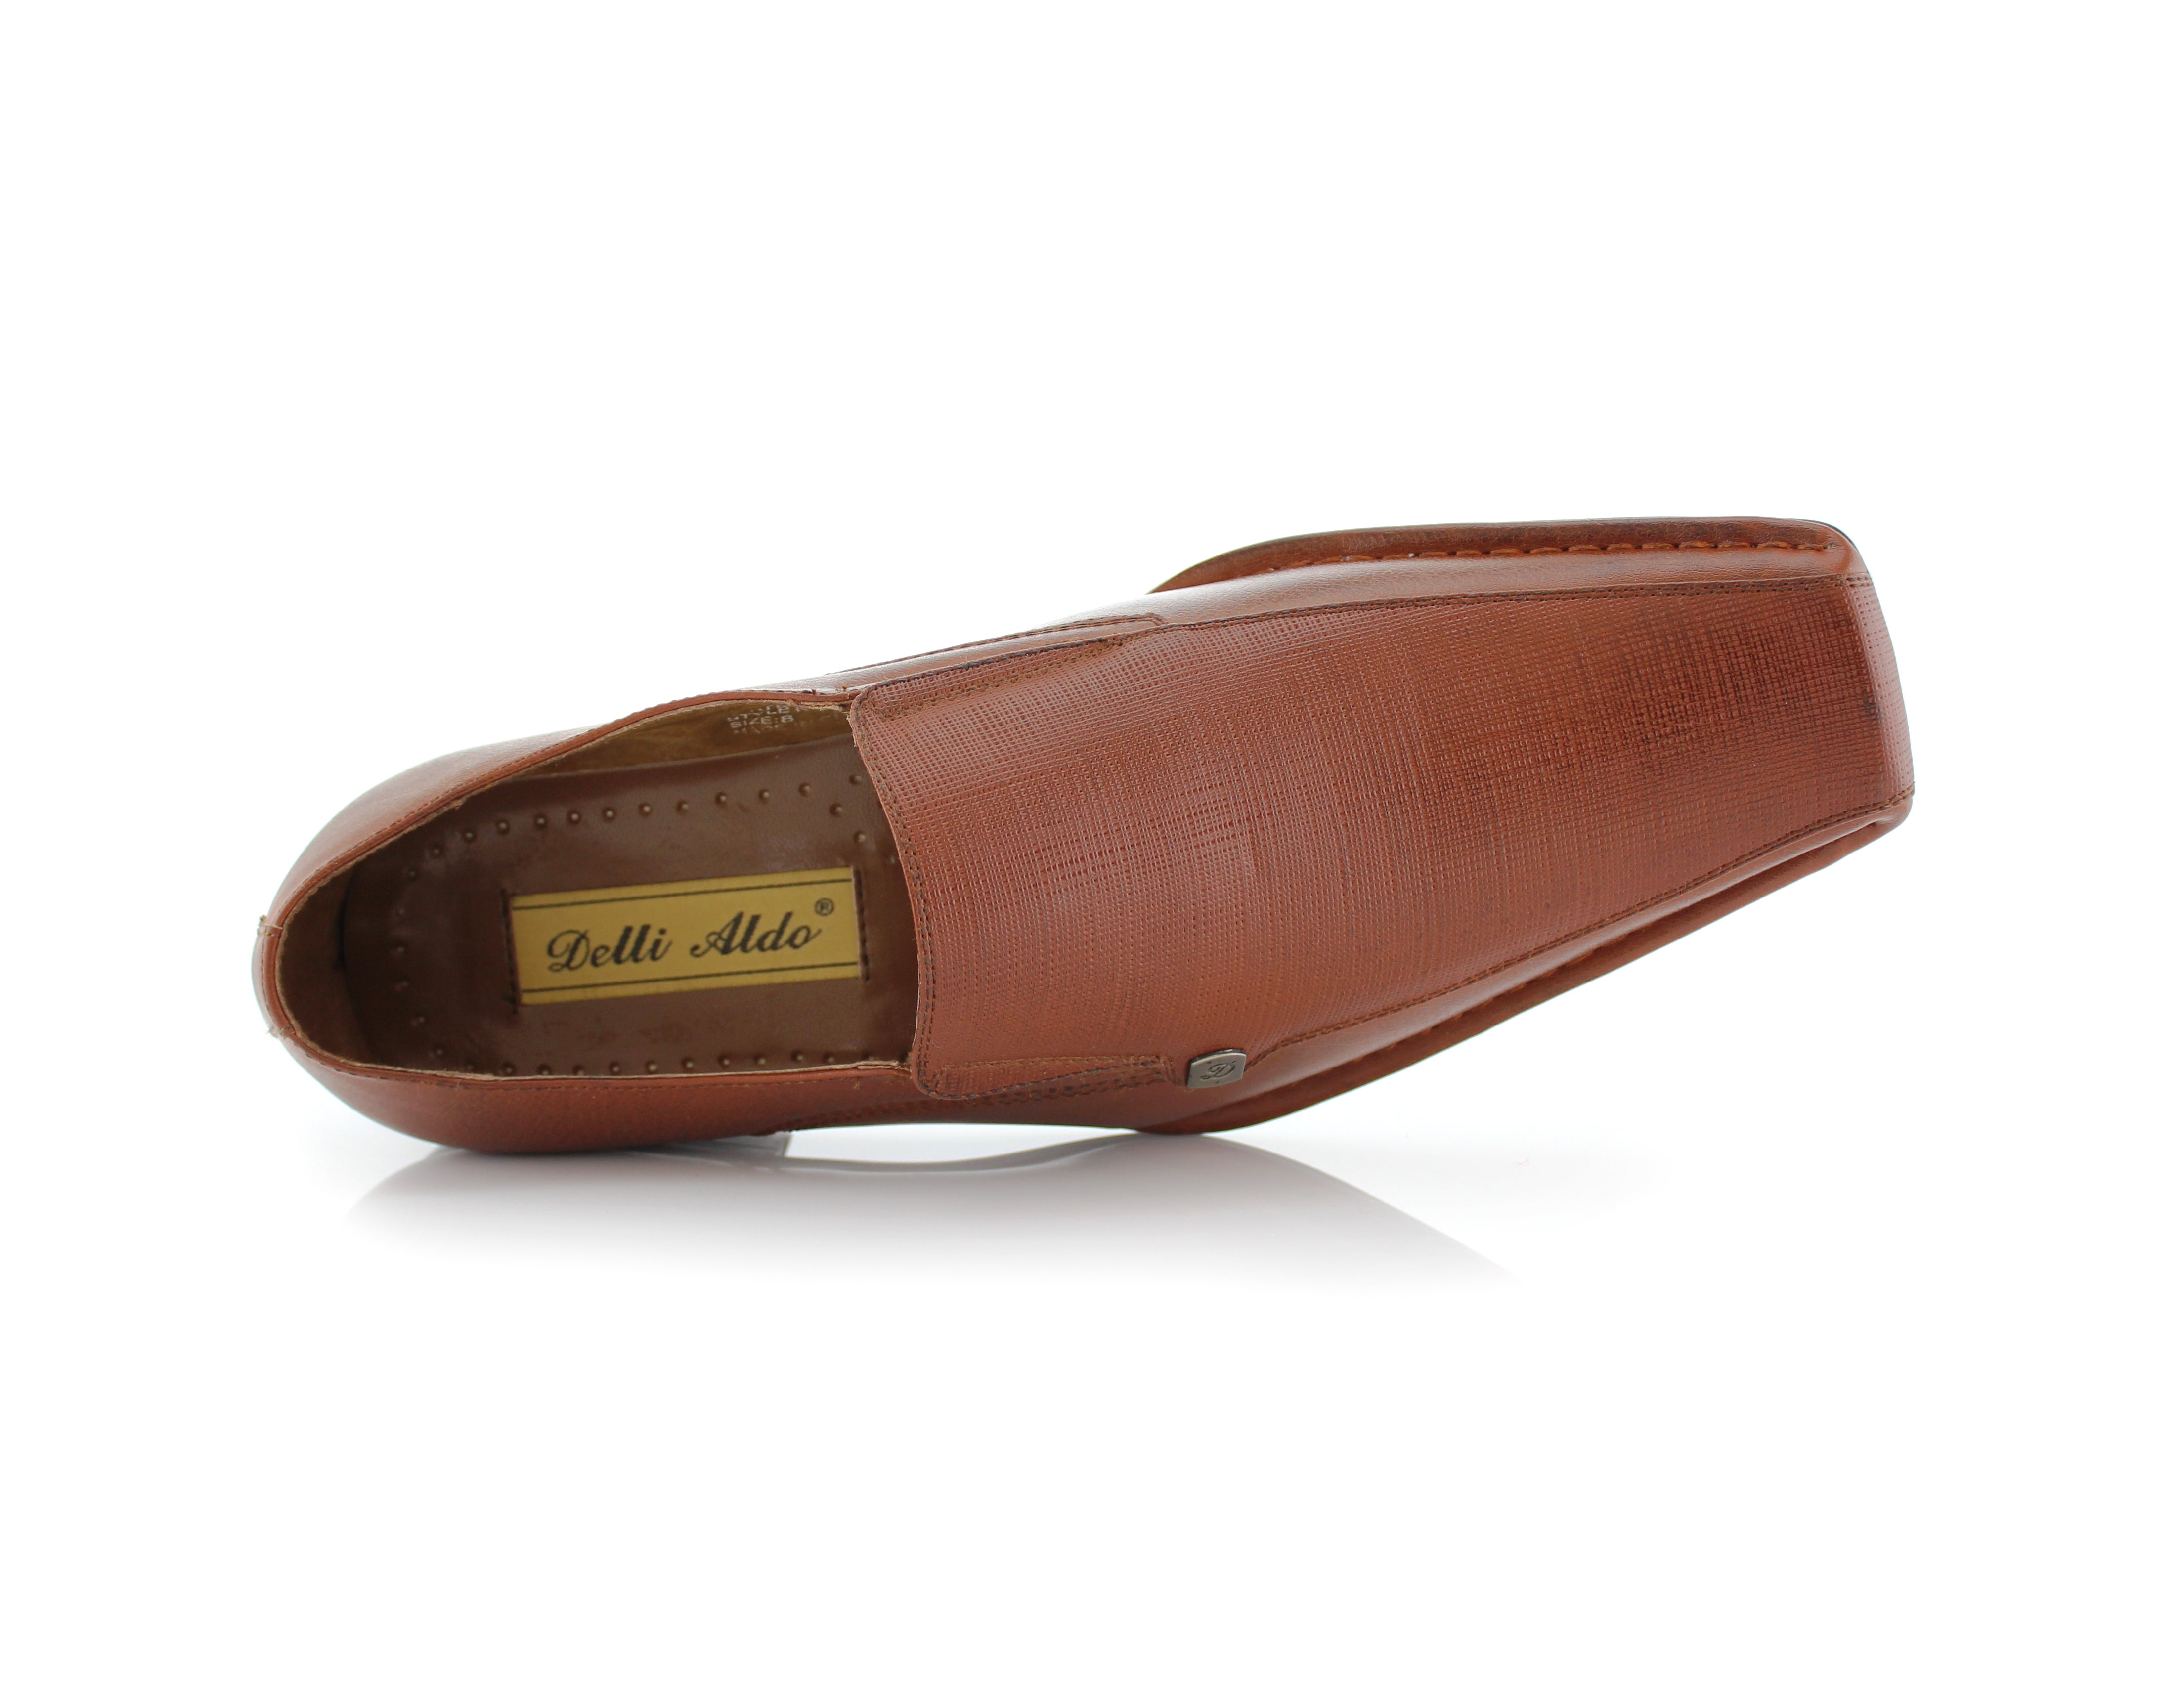 Square-Toe Embossed Leather Loafers | King by Delli Aldo | Conal Footwear | Top-Down Angle View